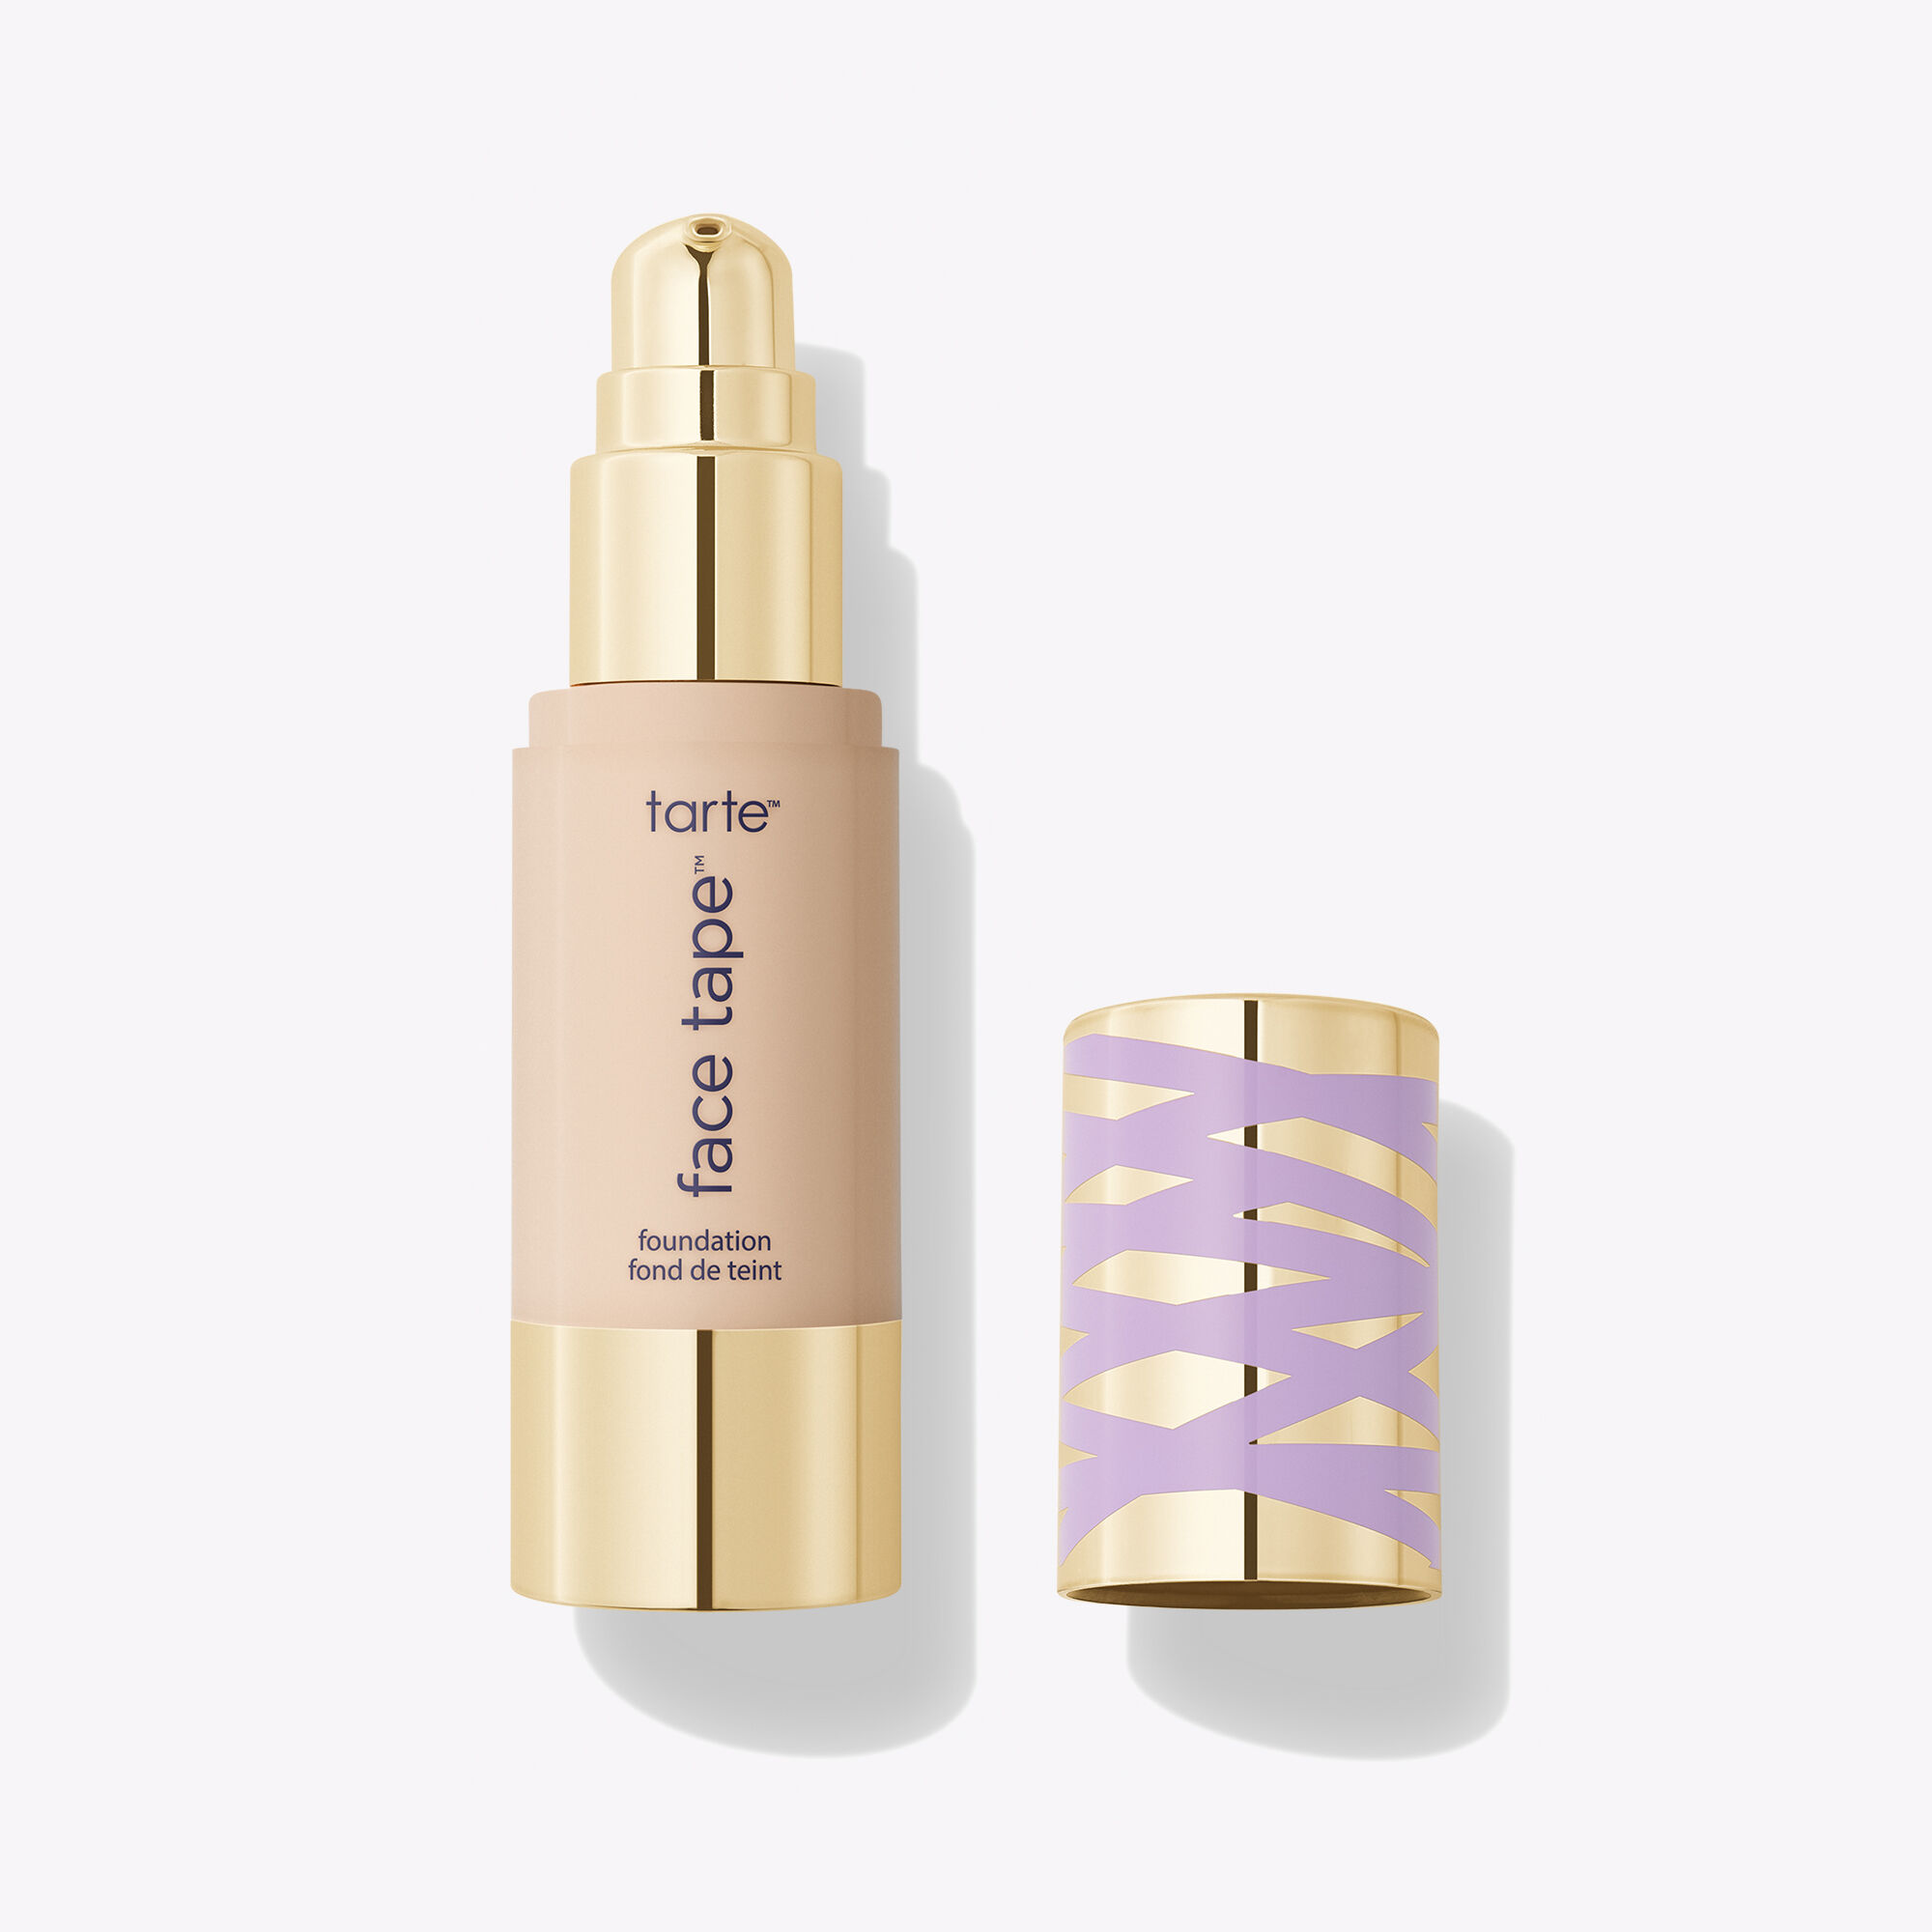 Tarte Cosmetics 50% Off All Foundations: Face Tape Foundation $19.50 & More + Free Shipping